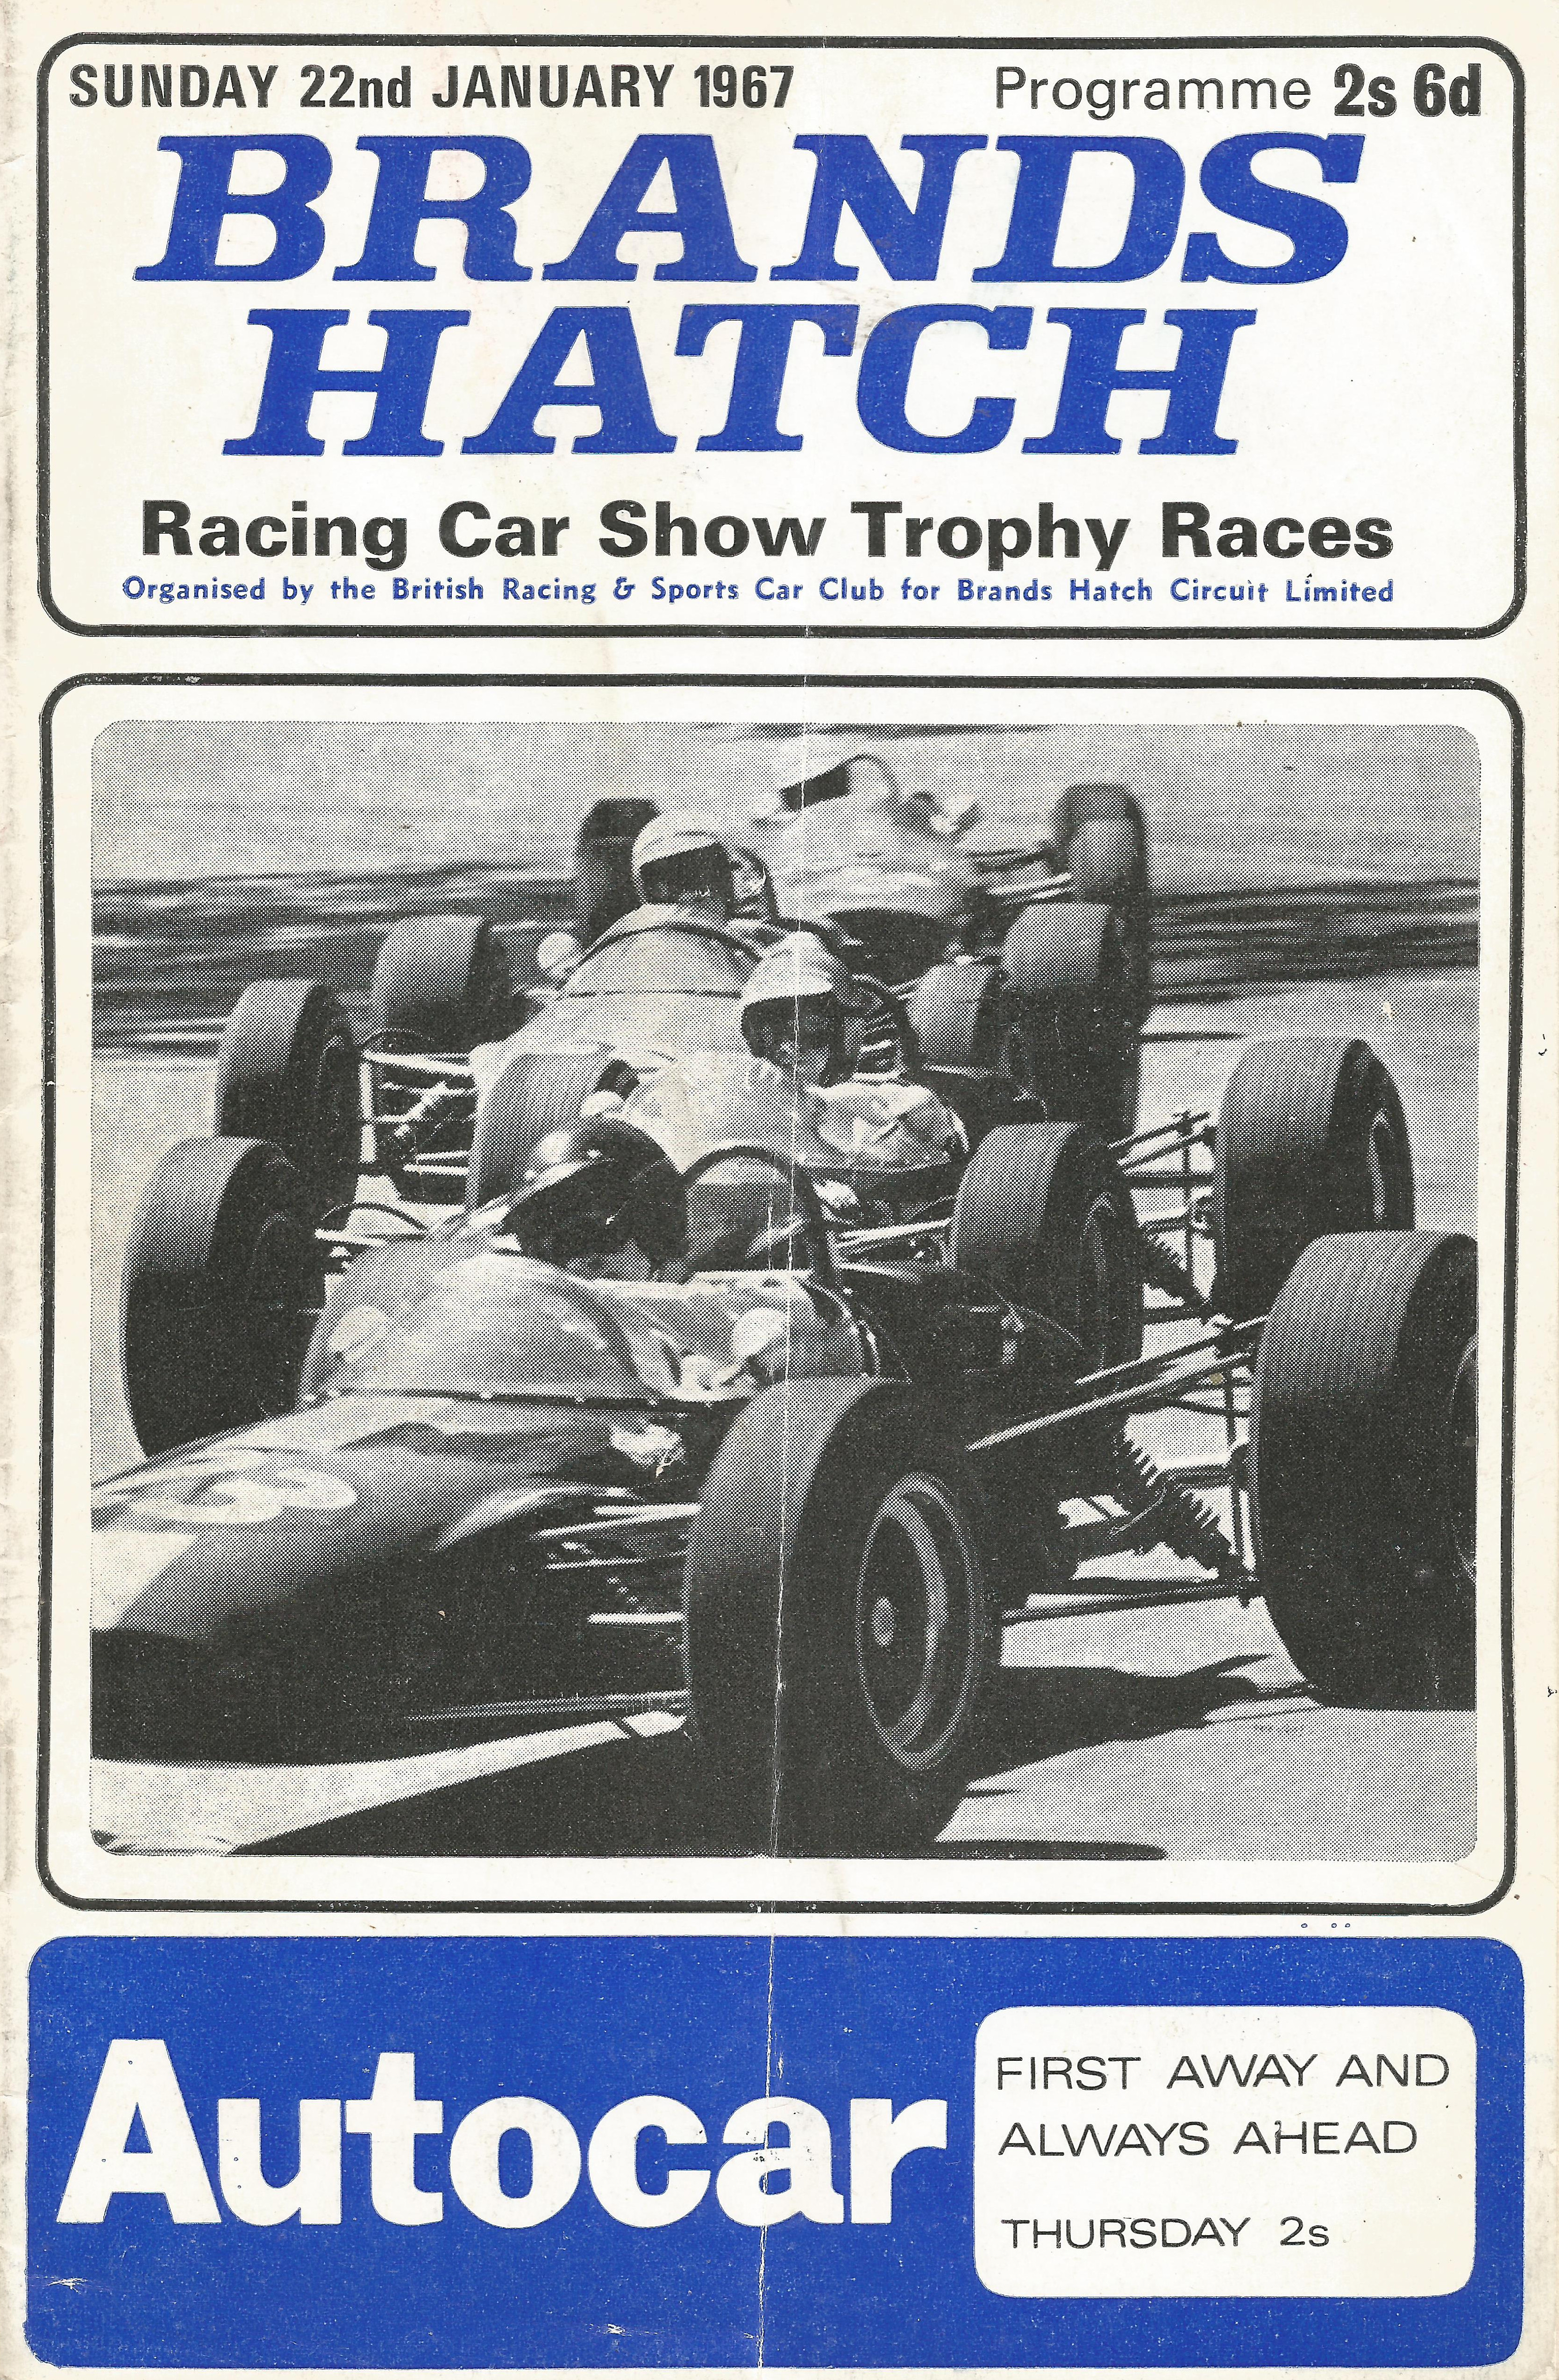 The Motor Racing Programme Covers Project